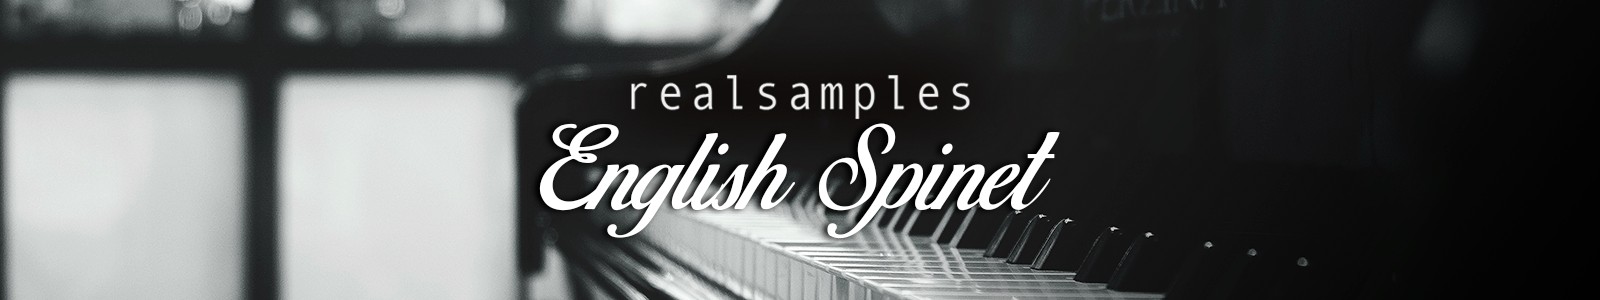 Realsamples English Spinet 1718